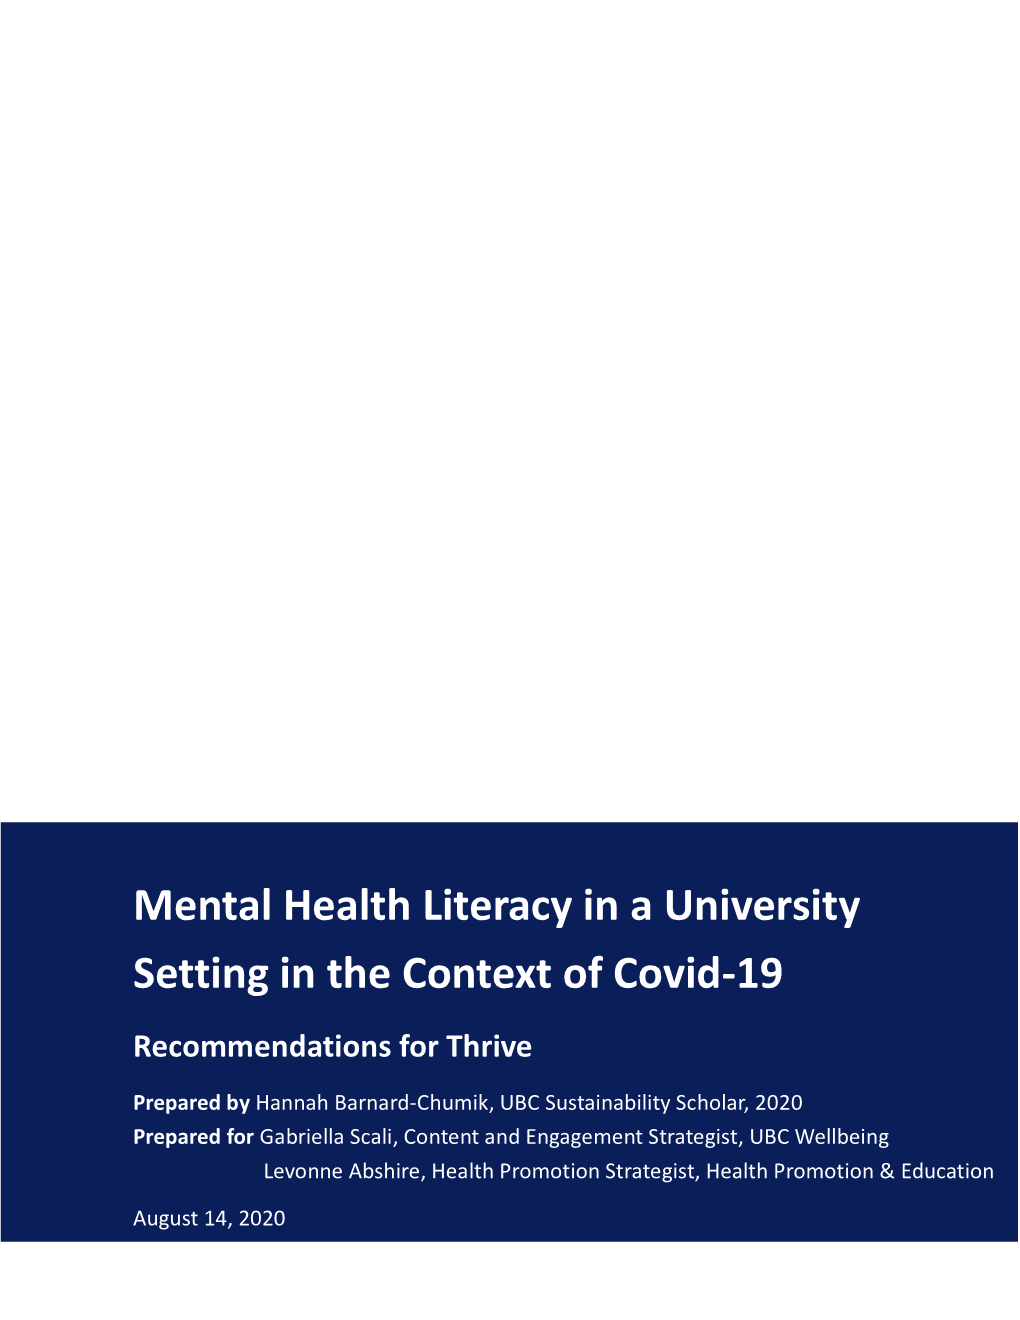 Mental Health Literacy in a University Setting in the Context of Covid-19 Recommendations for Thrive